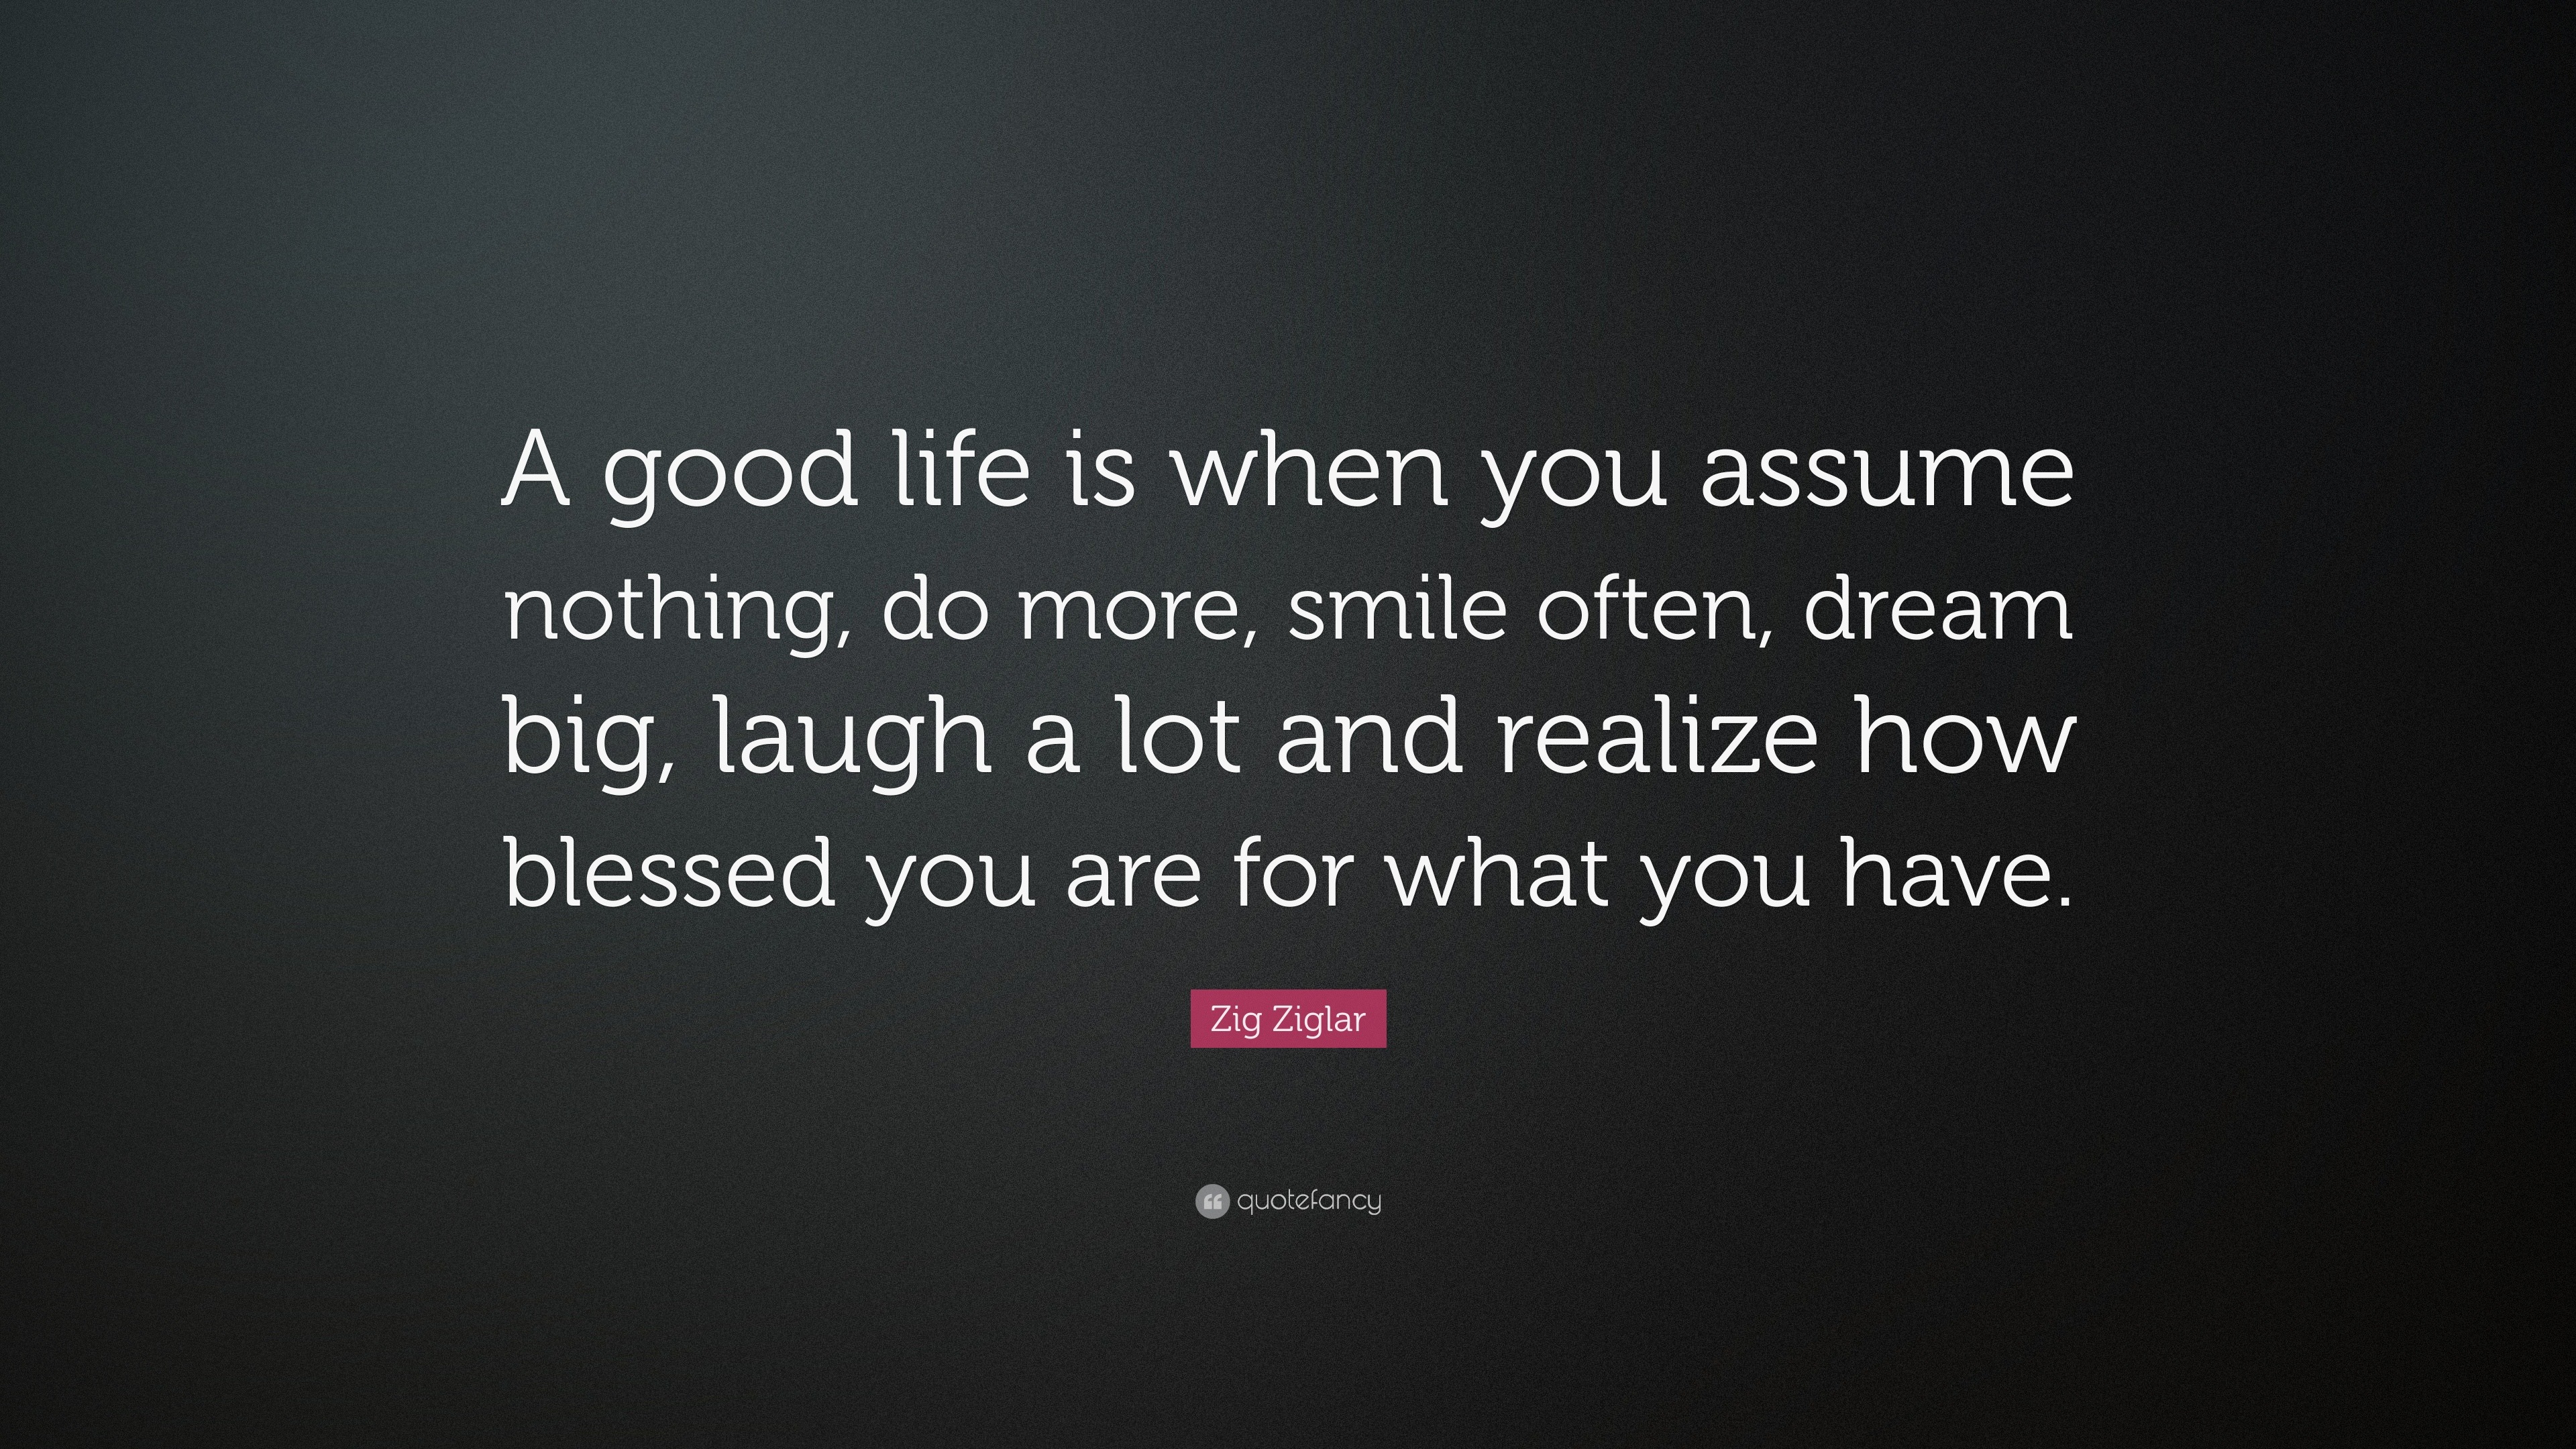 Zig Ziglar Quote “a Good Life Is When You Assume Nothing Do More Smile Often Dream Big